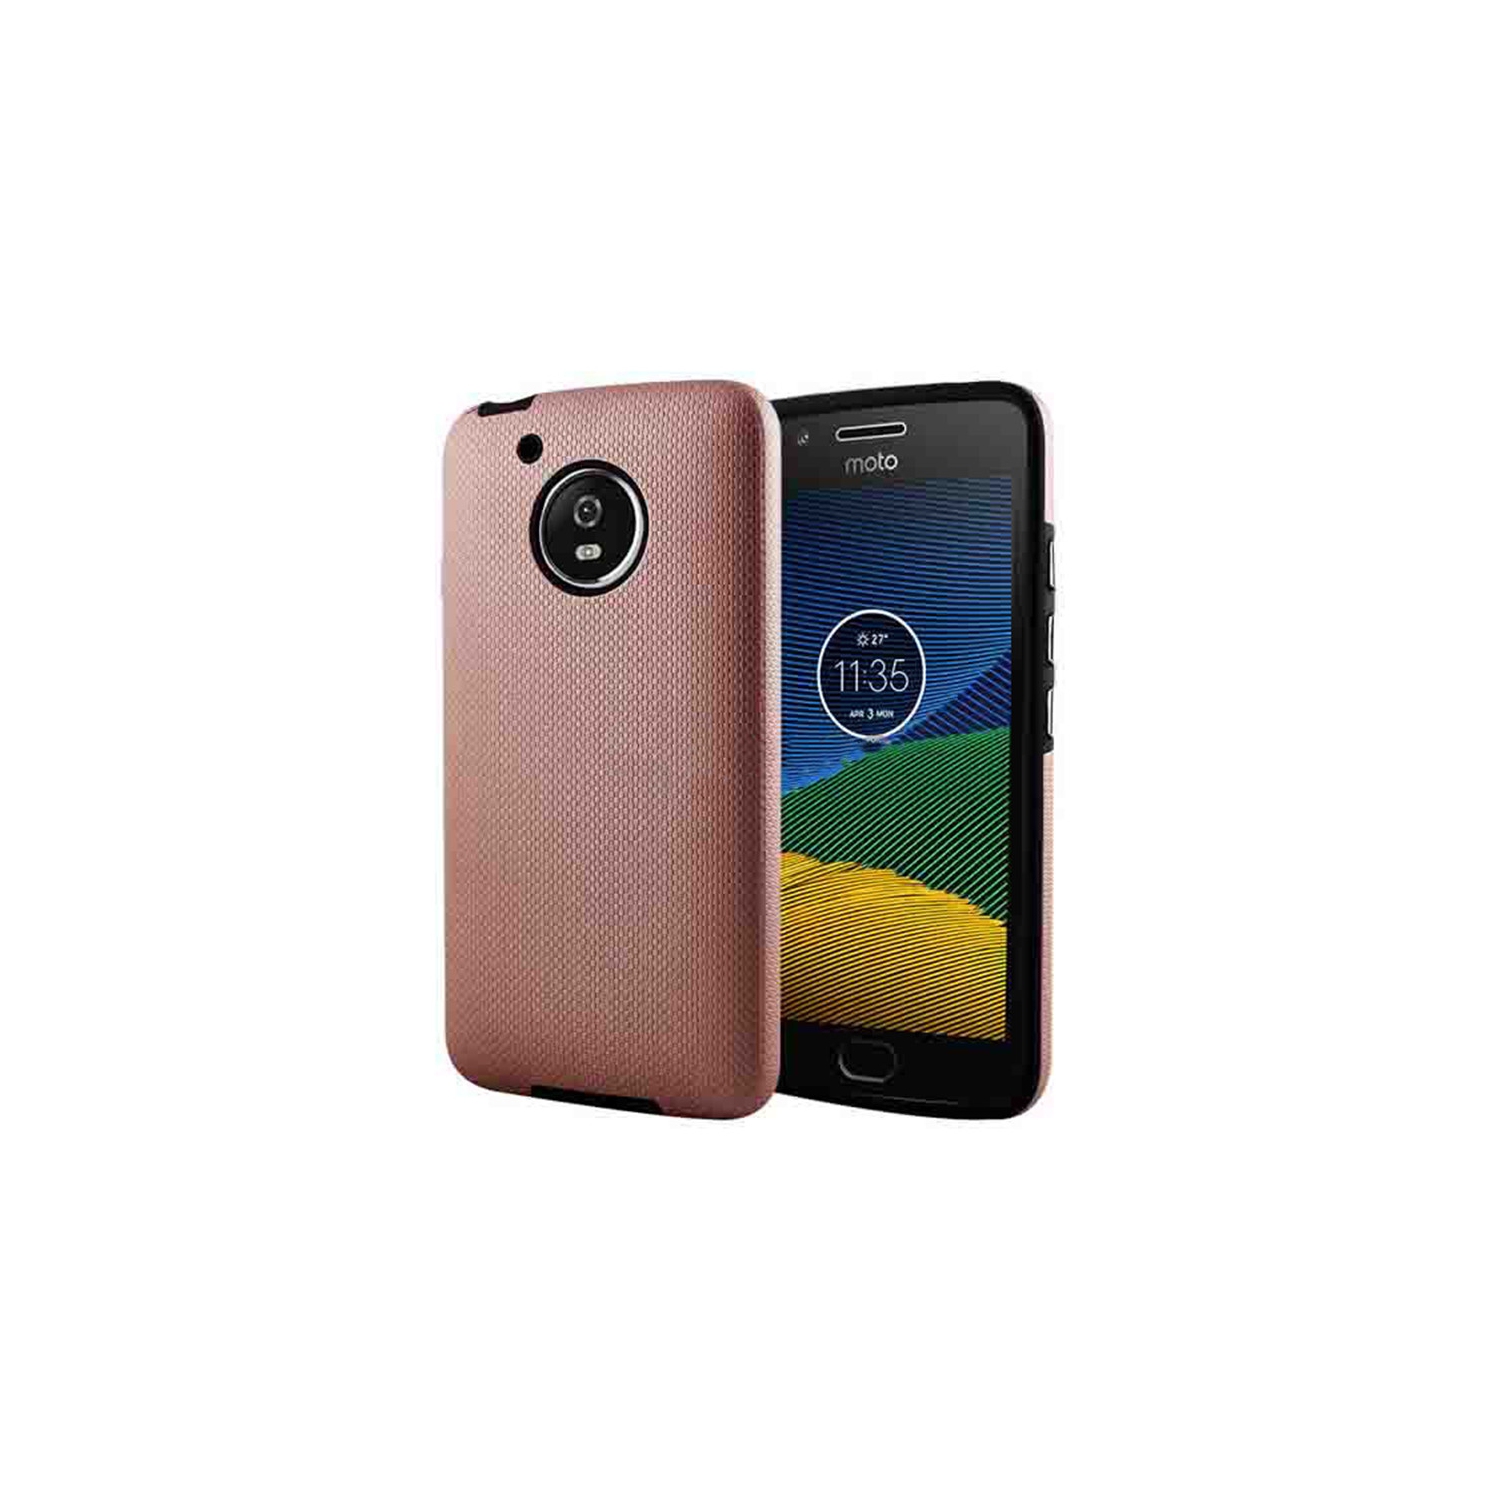 【CSmart】 Slim Fitted Hybrid Hard PC Shell Shockproof Scratch Resistant Case Cover for Motorola Moto Z3 Play, Rose Gold